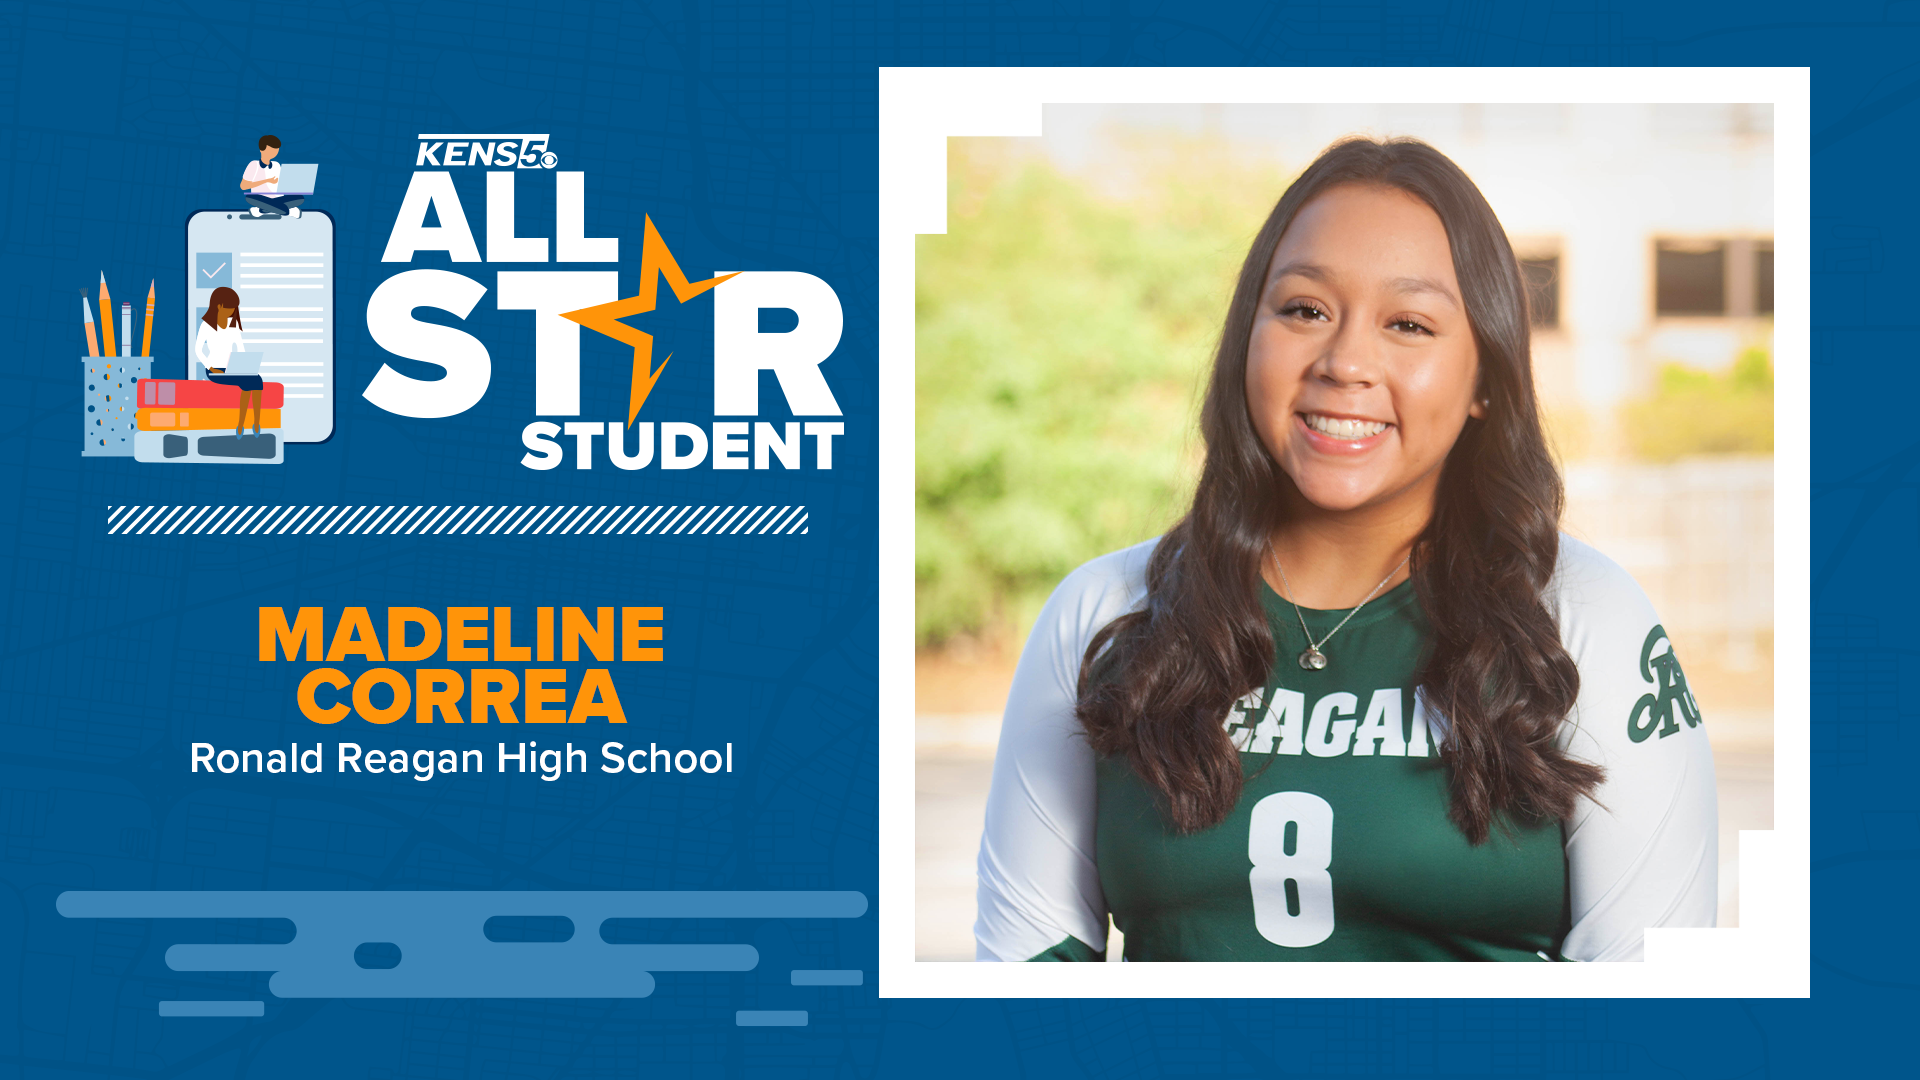 Northeast ISD senior, Madeline Correa, brings a courageous spirit to everything she does.